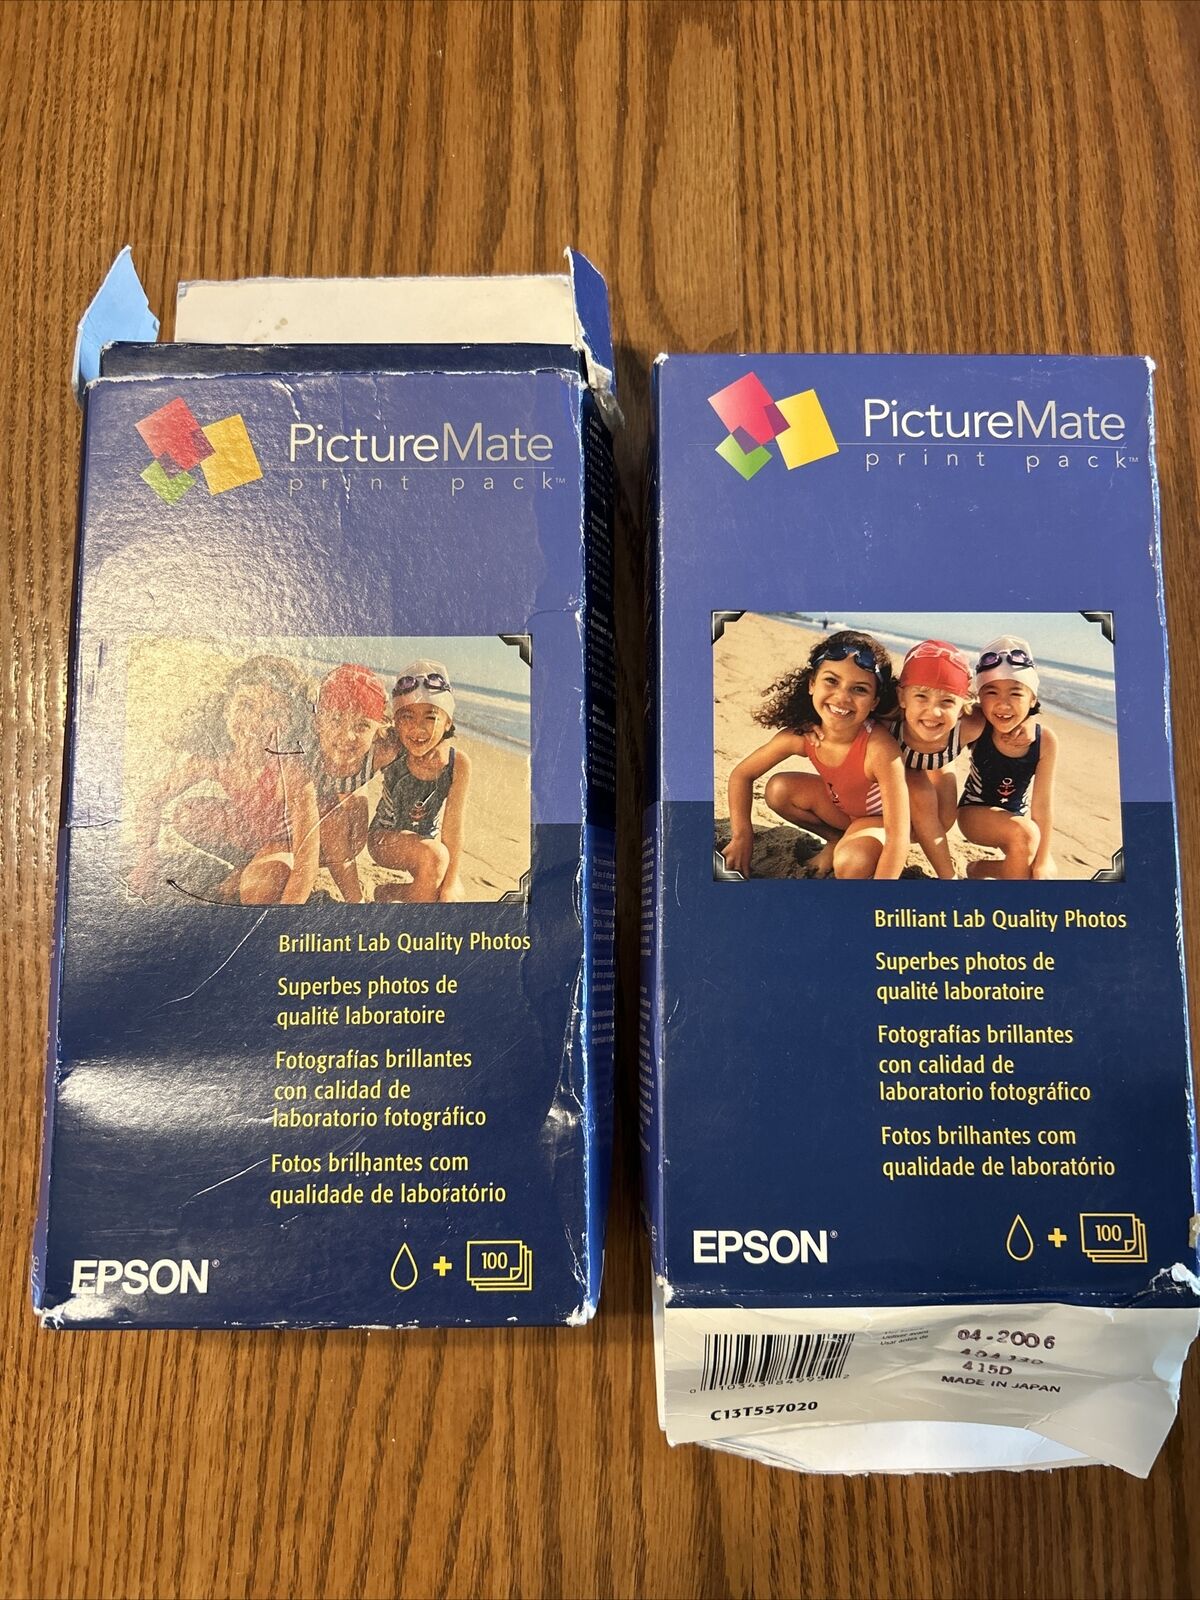 2 Epson  Picture Mate Print Pack T5570 100 Pack Expired 04/2006  factory sealed